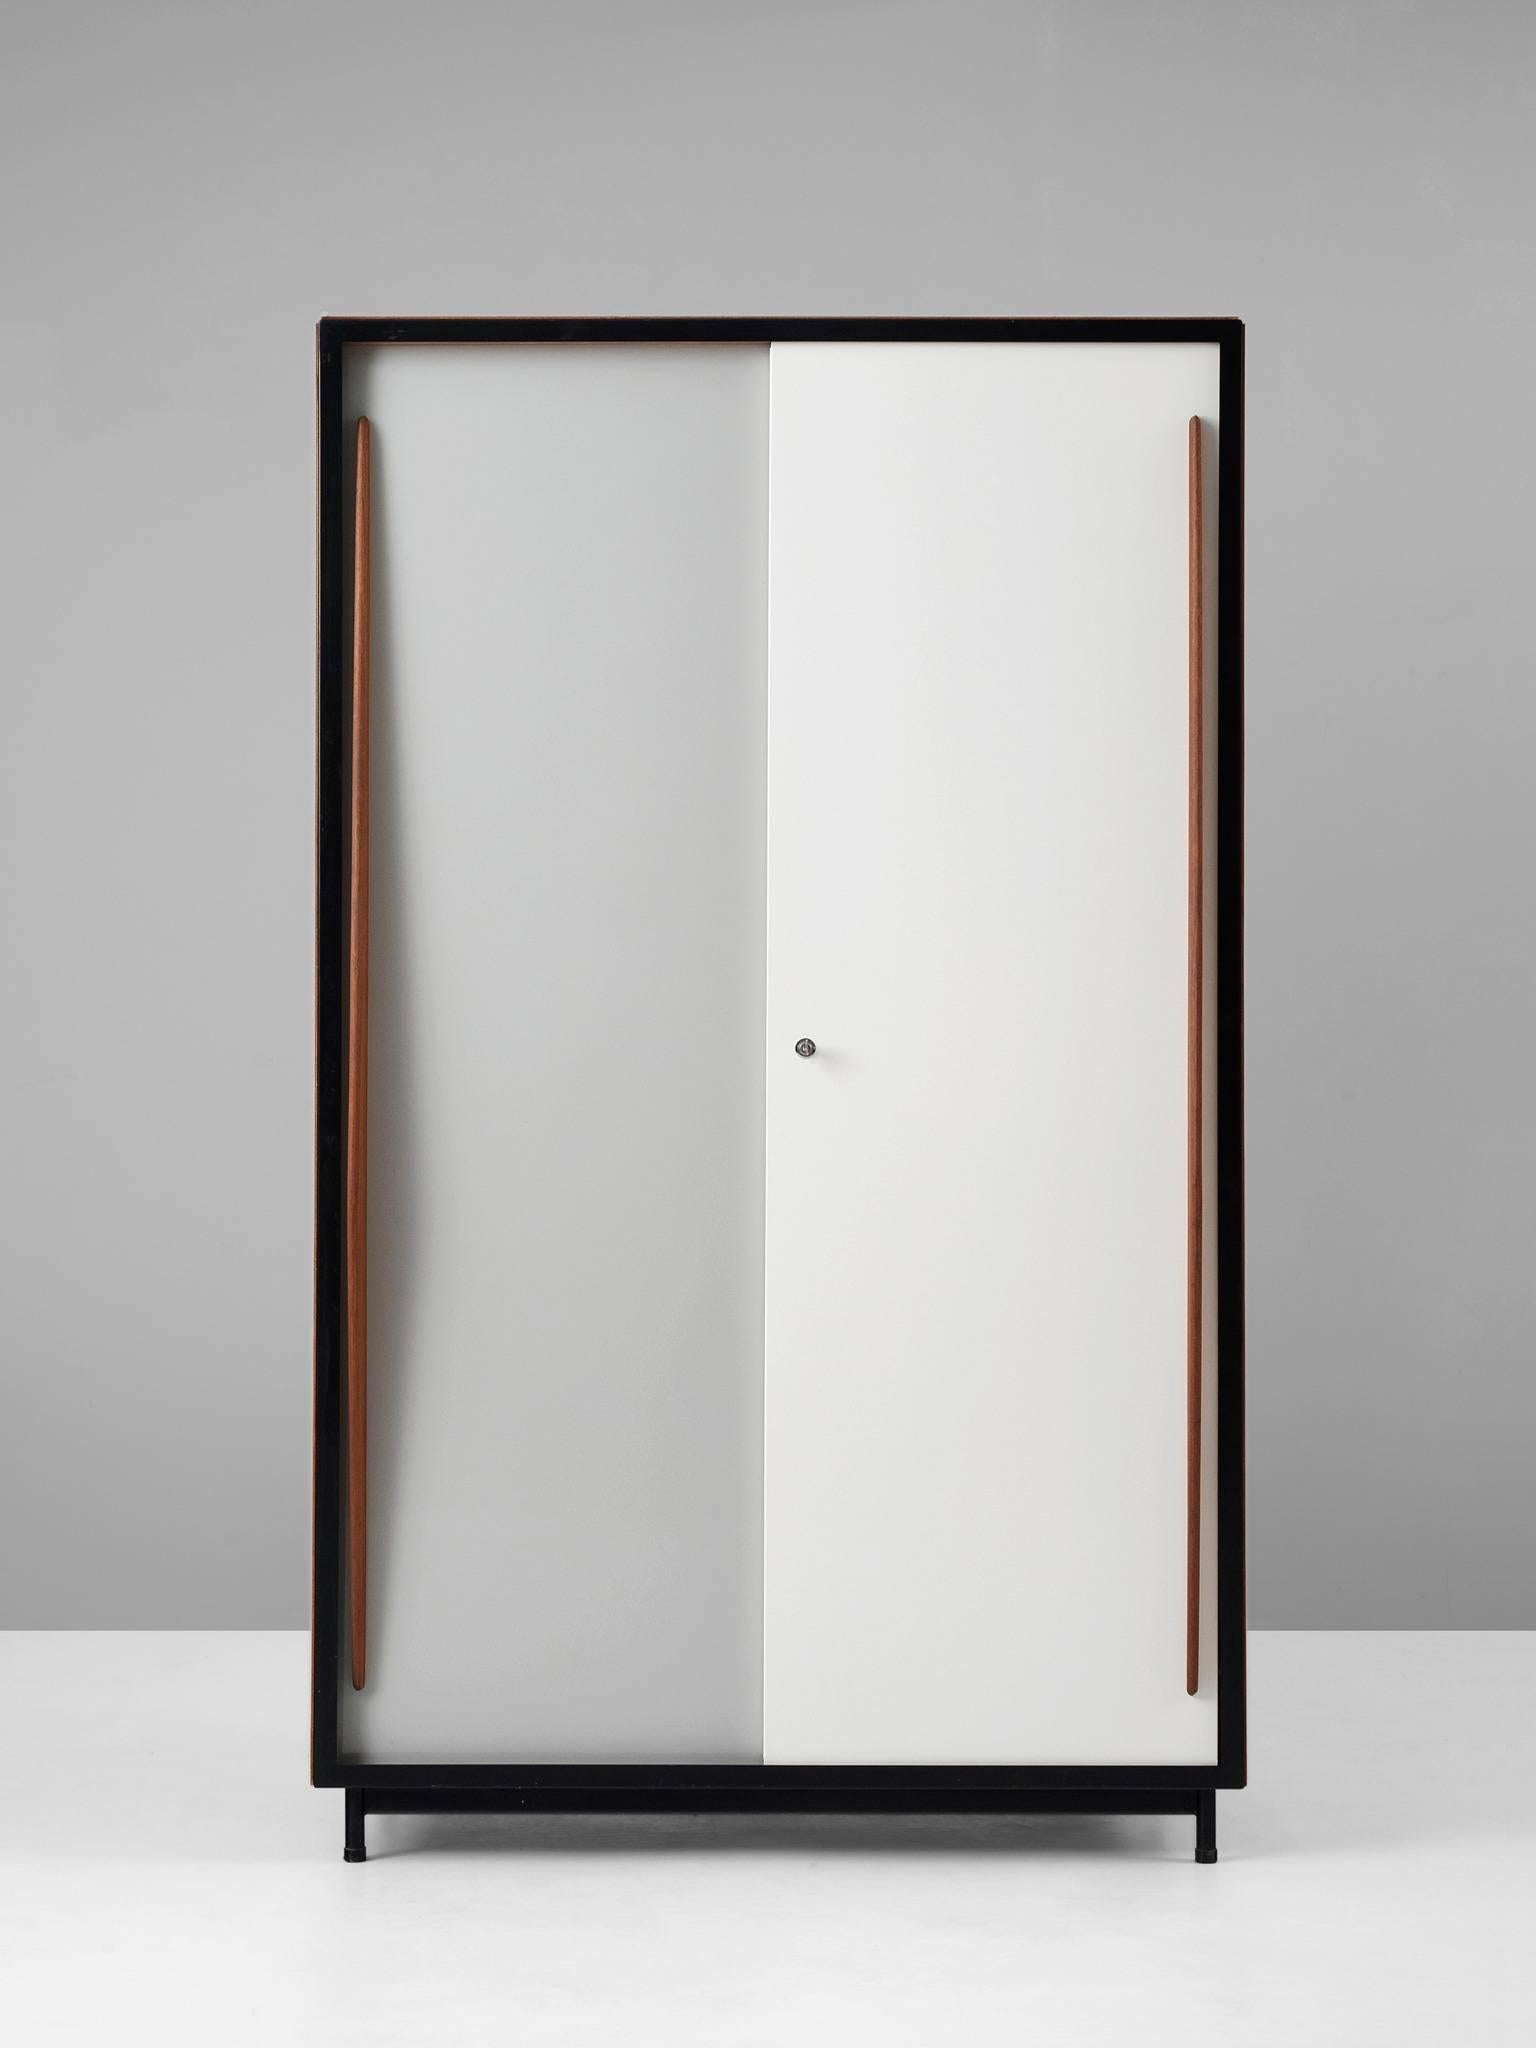 Willy Van Der Meeren for Tubax, Cabinet, in wood, mahogany and metal, Belgium, 1952. 

Nice early example of Industrial Design from the Belgium modernist stream, designed by Willy Van Der Meeren. Originally designed for use in school buildings and